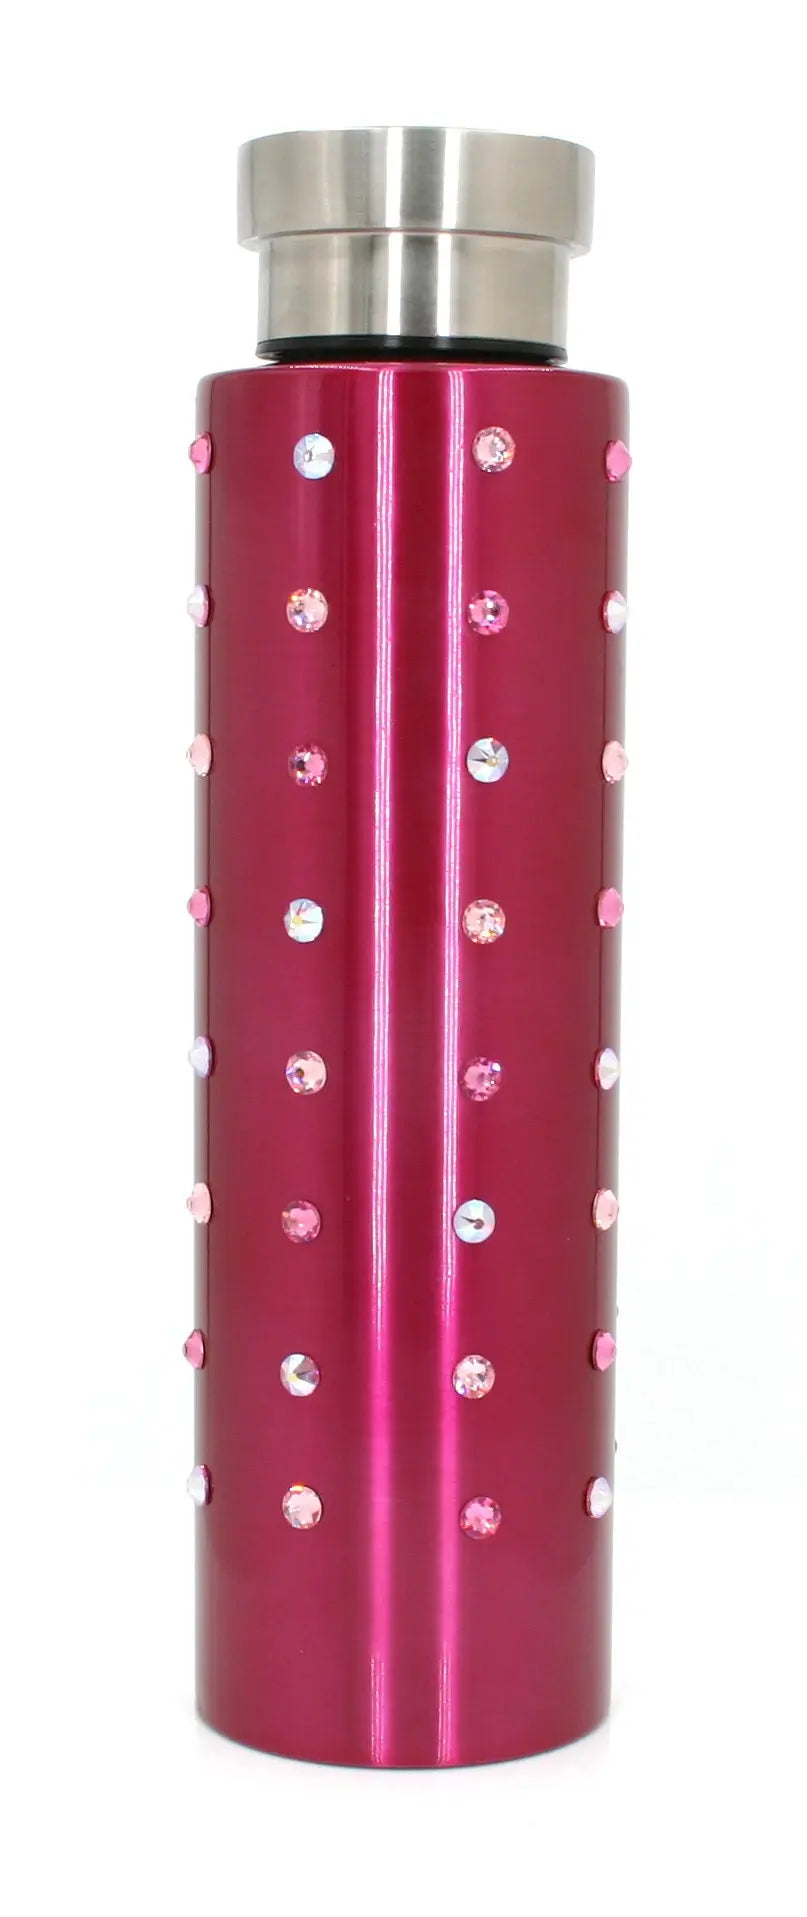 Travel Mug, (Bling) Tumbler w Swarovski Crystal For Women. Double Wall Vacuum Sealed Stainless Steel. Sport Water Bottle with Screw Top. 